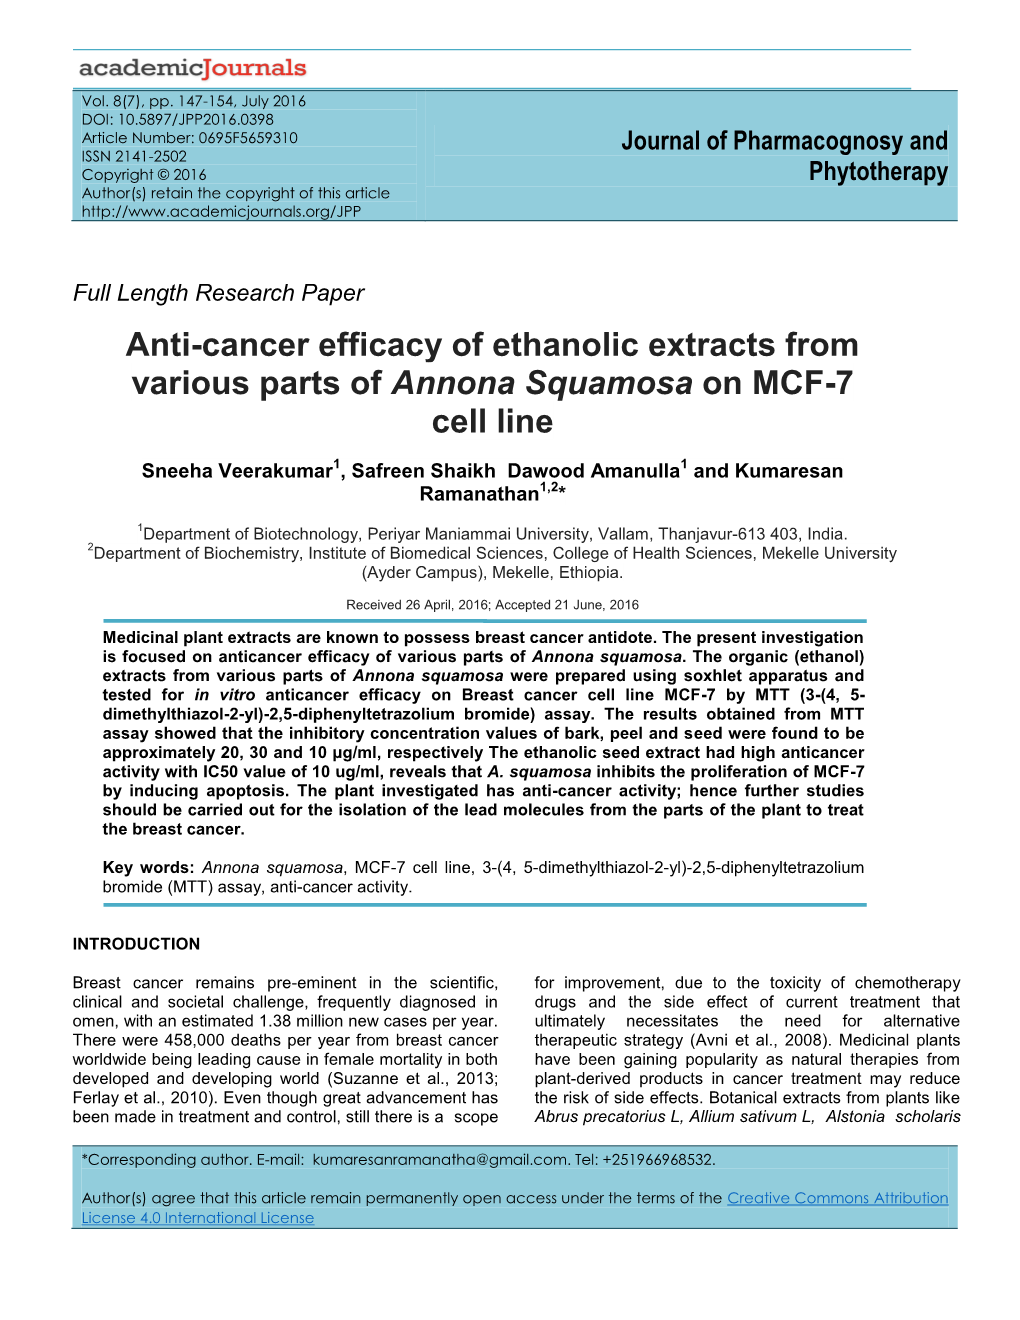 Anti-Cancer Efficacy of Ethanolic Extracts from Various Parts of Annona Squamosa on MCF-7 Cell Line